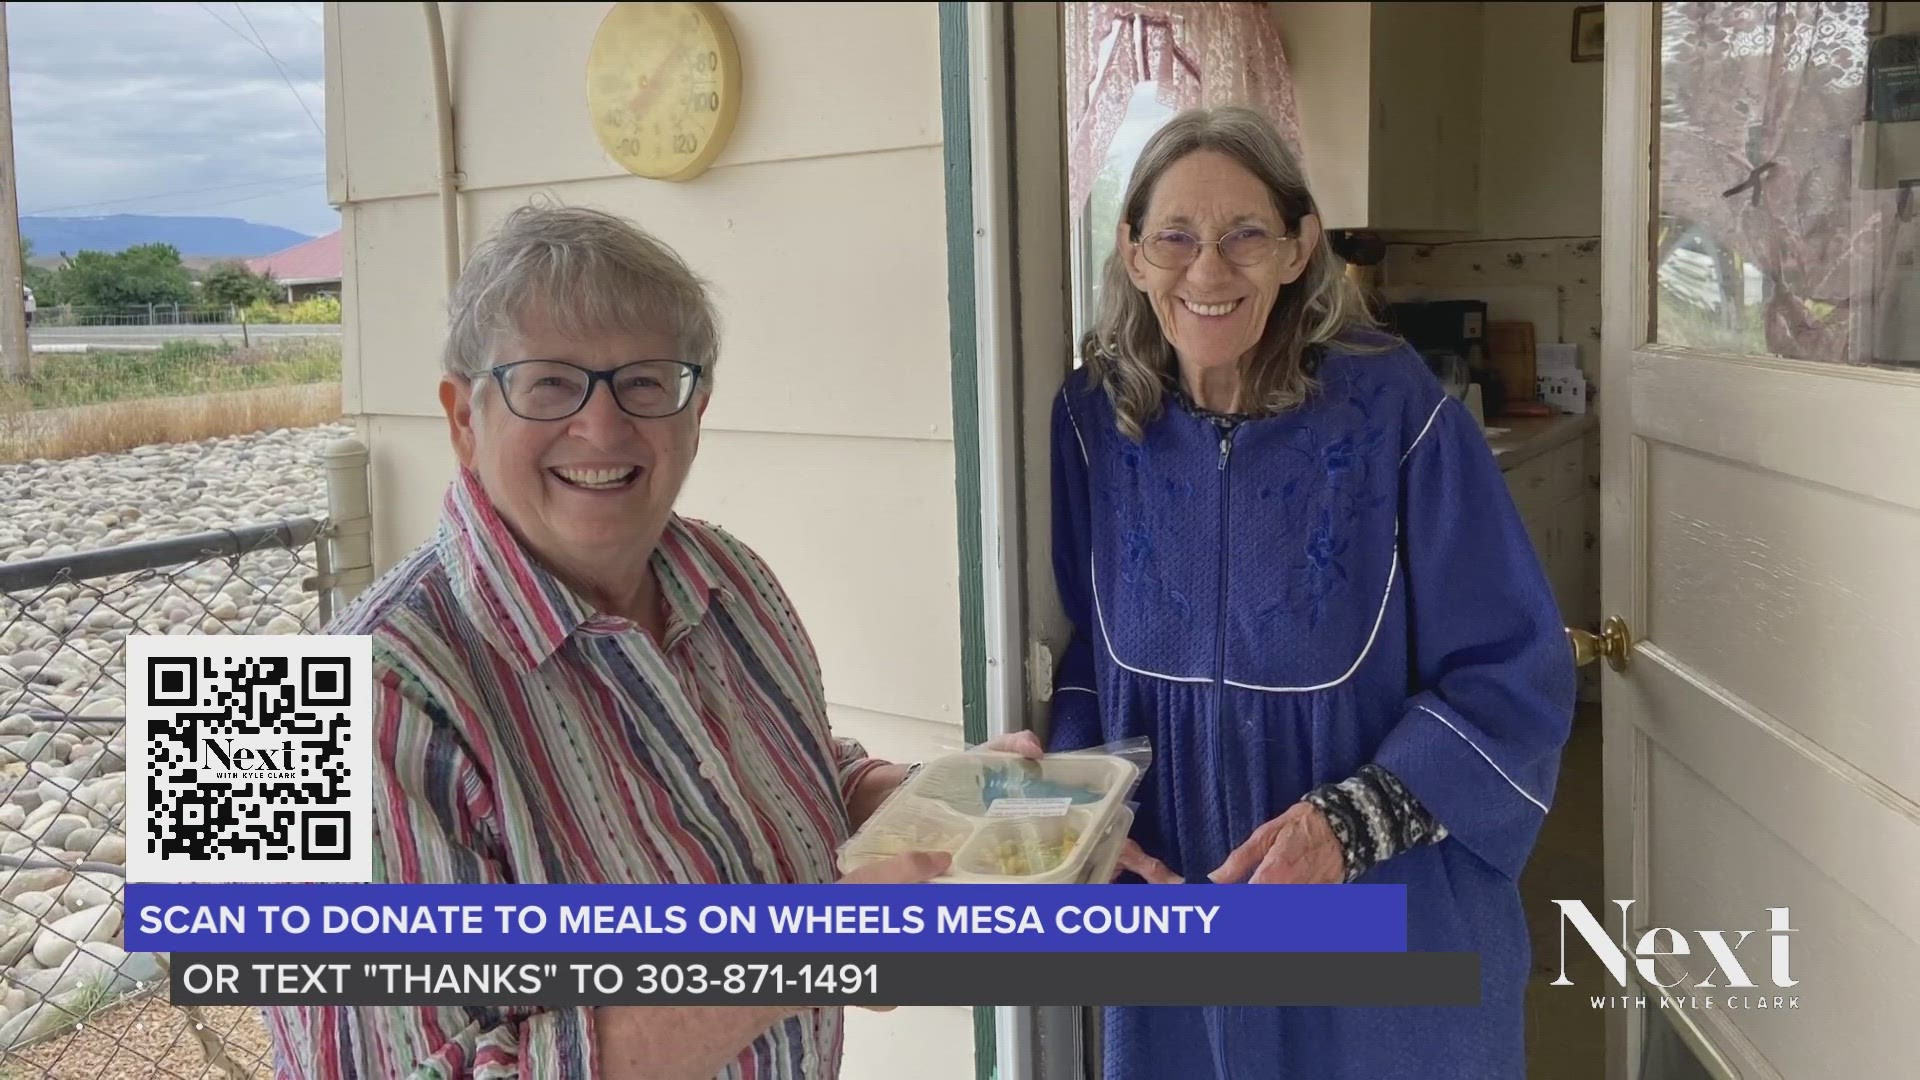 Mesa County has more than 100 seniors on a waiting list to receive Meals on Wheels. We can help take folks off that list and feed them for a year.